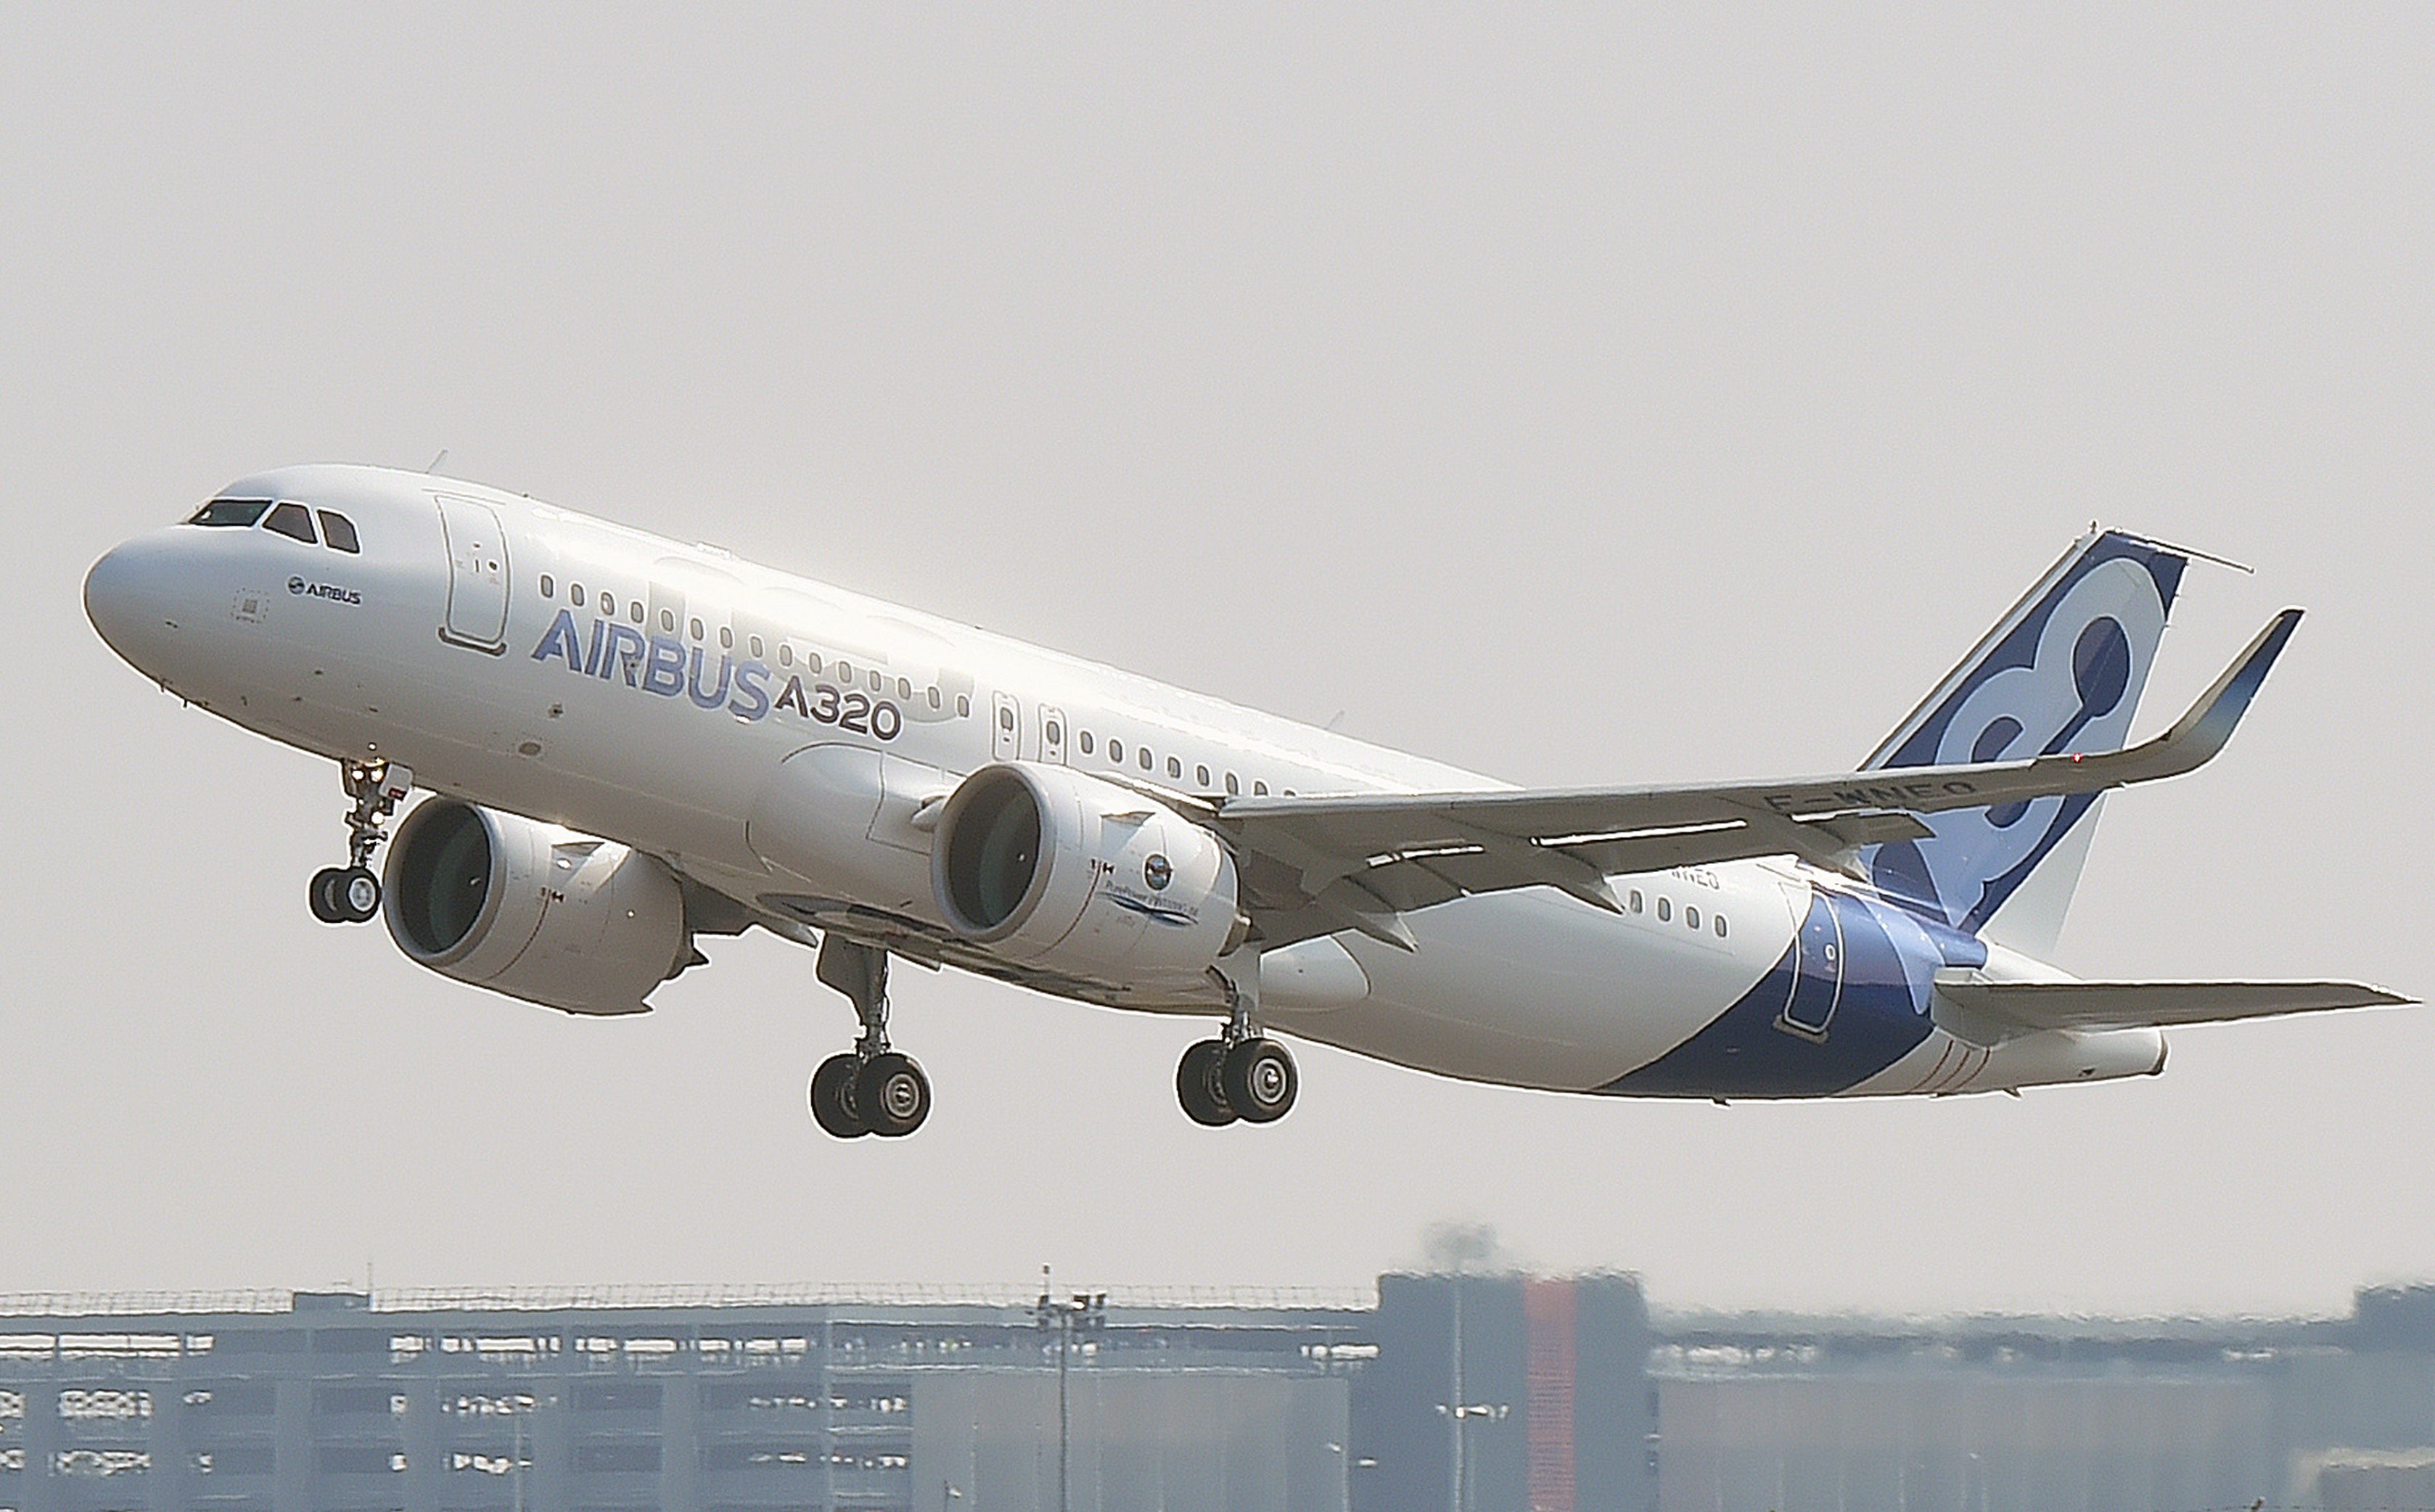 An Airbus 320 takes off in France. China Aircraft Leasing is buying planes from the European firm and is in discussions with Boeing to possibly buy more. Shares of the company rallied on Friday. Photo: AFP